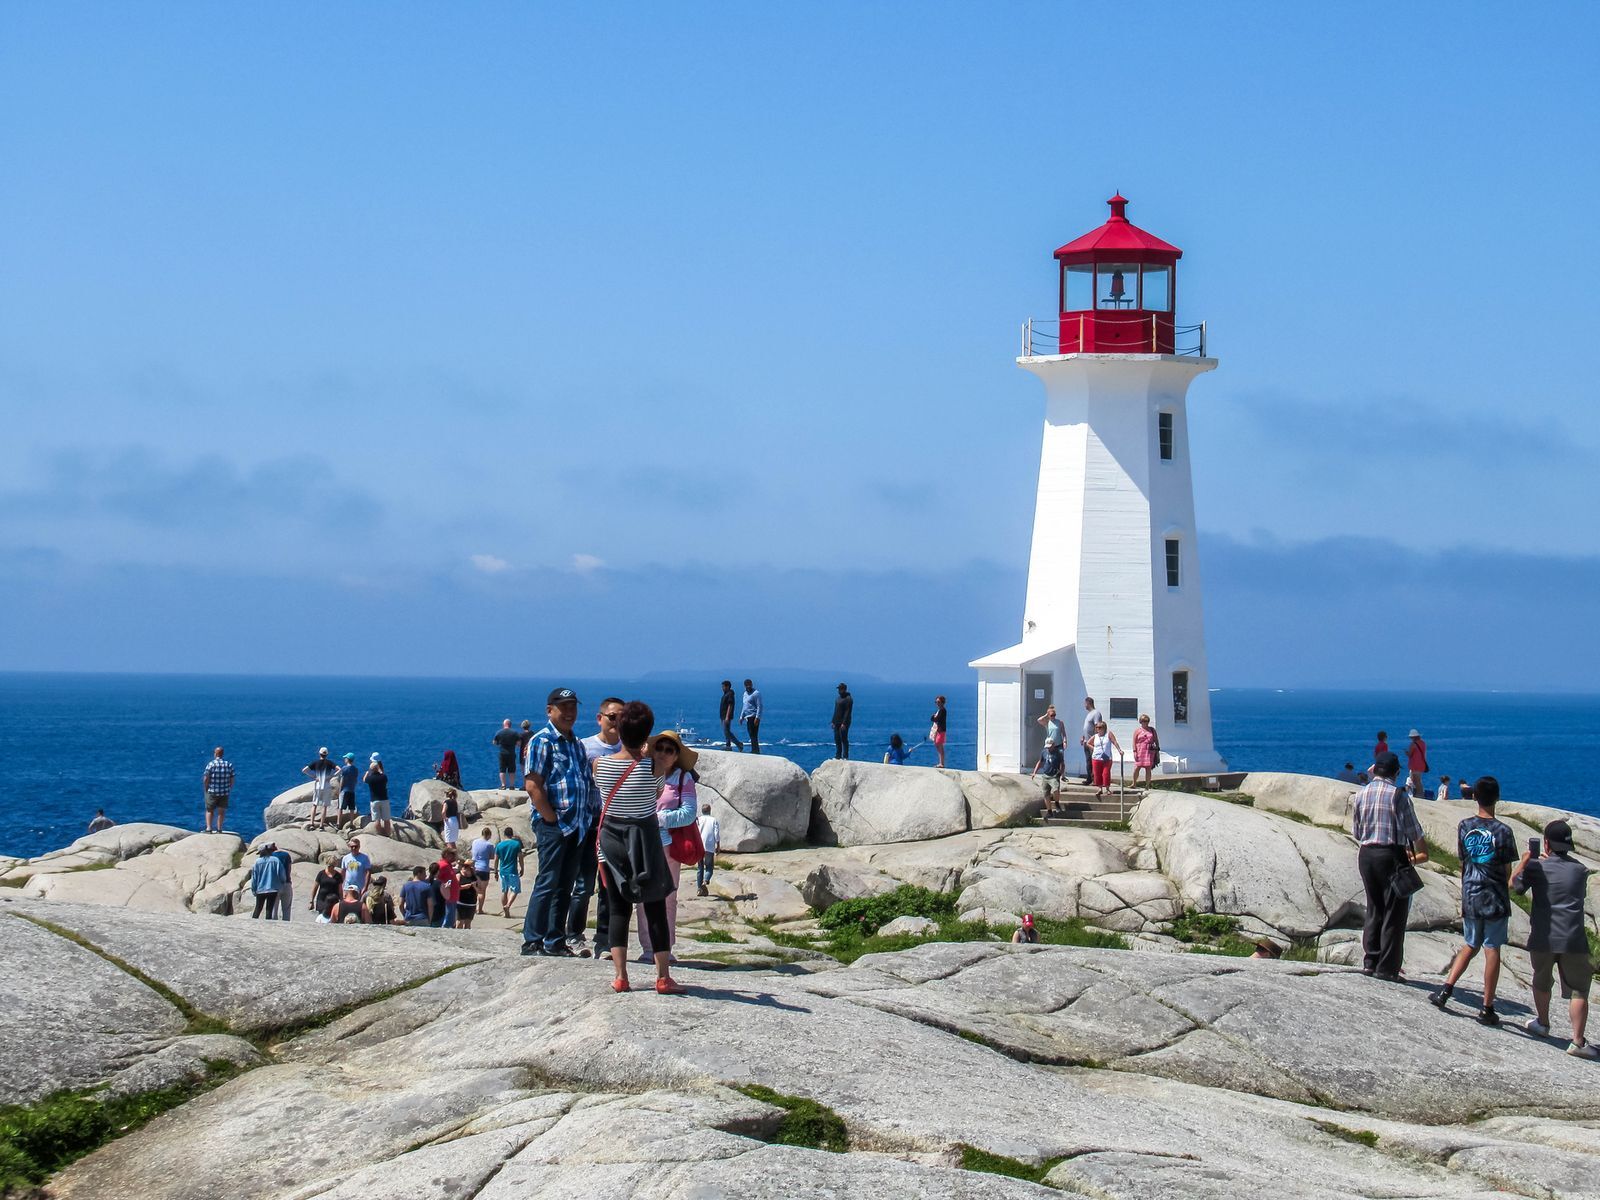 <p>The darling tourist attraction of the Maritimes, <a href="https://www.novascotia.com/see-do/attractions/peggys-cove-village-and-lighthouse/1468">Peggy’s Cove Lighthouse</a> is one of the most iconic—and maybe most photographed—lighthouses in Canada. The lighthouse and fishing village are most certainly worth the visit—if you’re not deterred, that is, by the cruise ship crowds and touristic nature of this iconic Canadian travel destination. For a more serene vibe, check out the Bay of Fundy’s charming <a href="https://www.novascotia.com/see-do/attractions/cape-dor-lighthouse/6027">Cape d'Or Coastal Park</a>.</p>